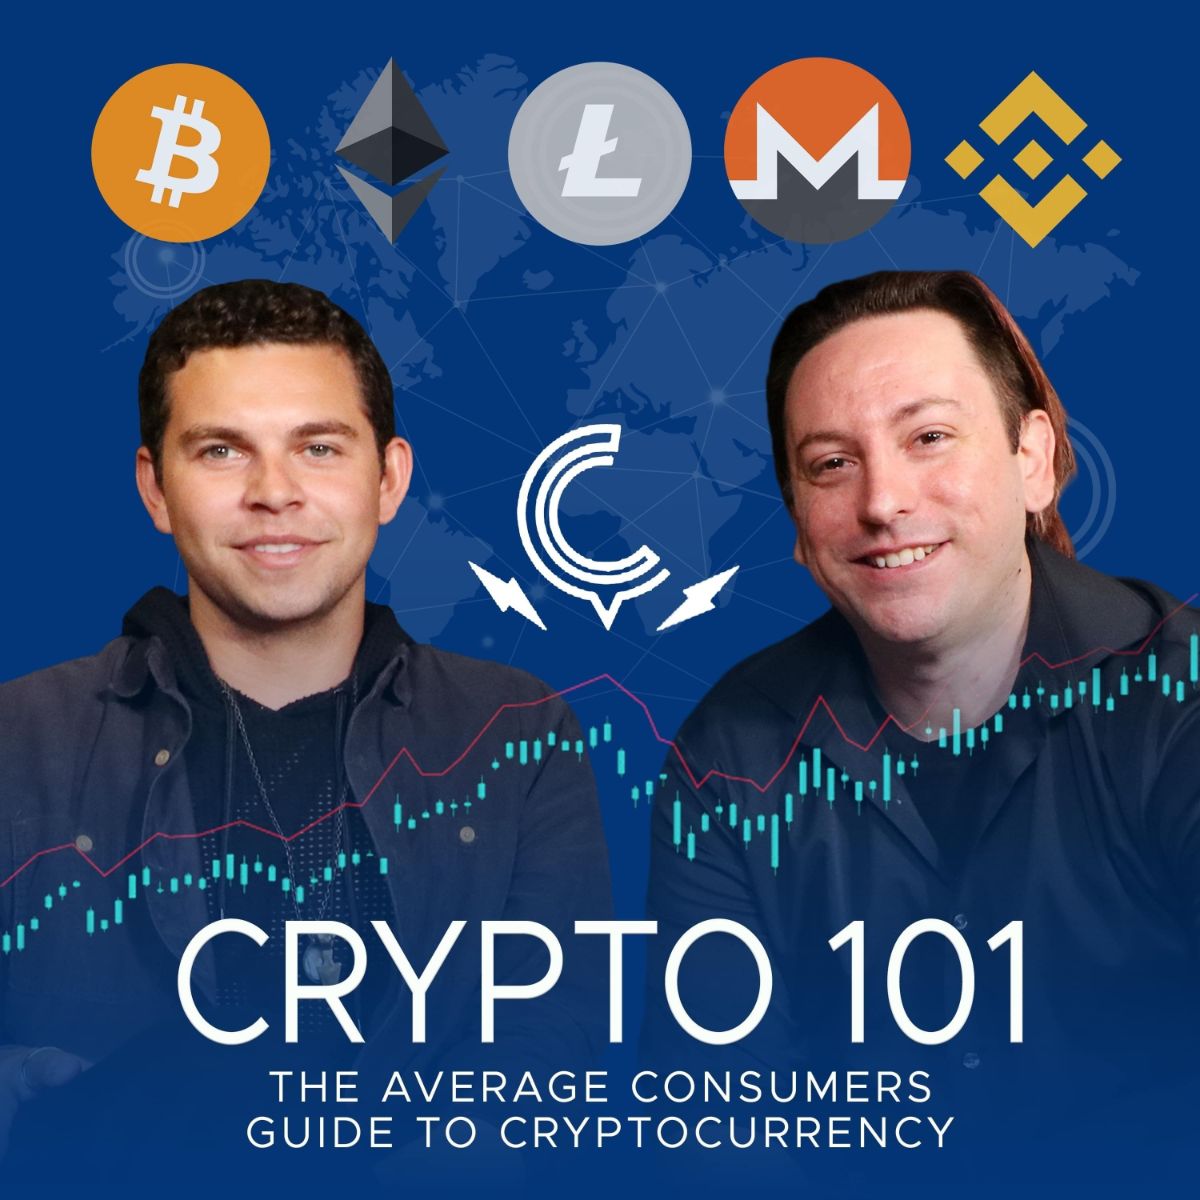 Ep. 507 How Blockchain Will Change your Life with William Quigley